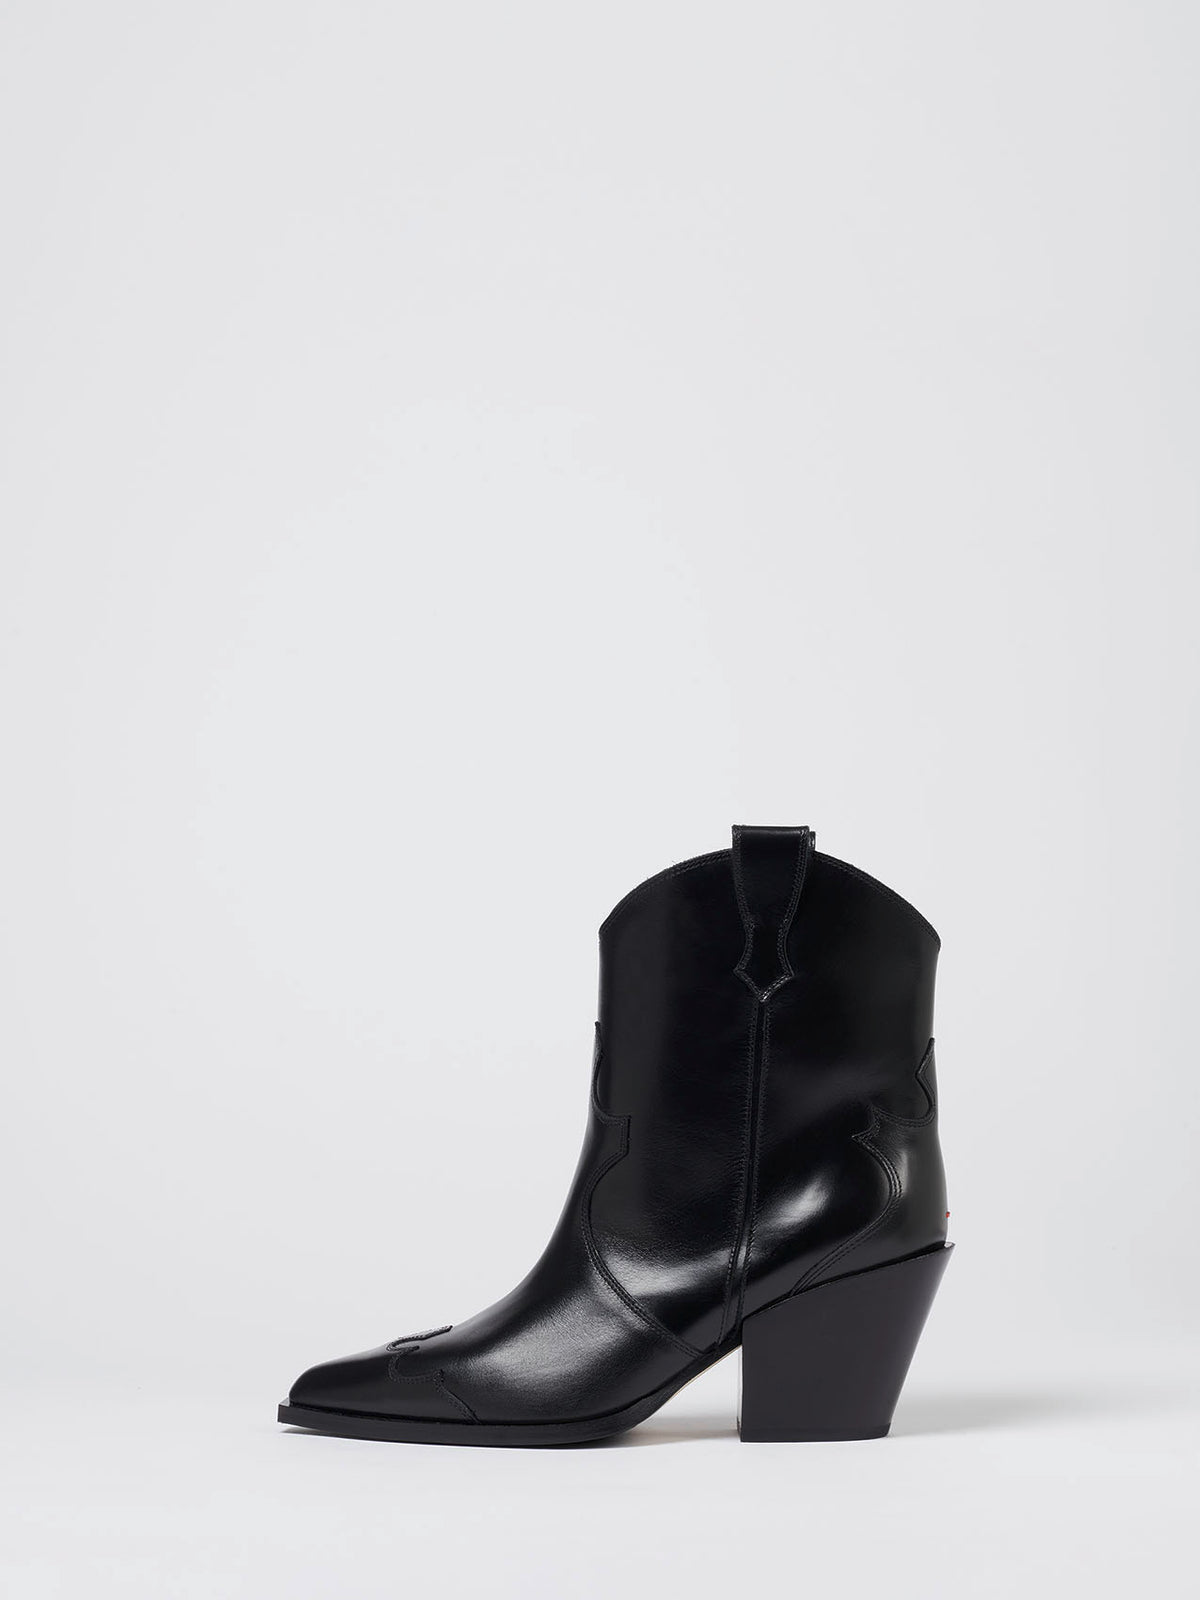 Aeyde | LEANDRA Black Leather Ankle Boot